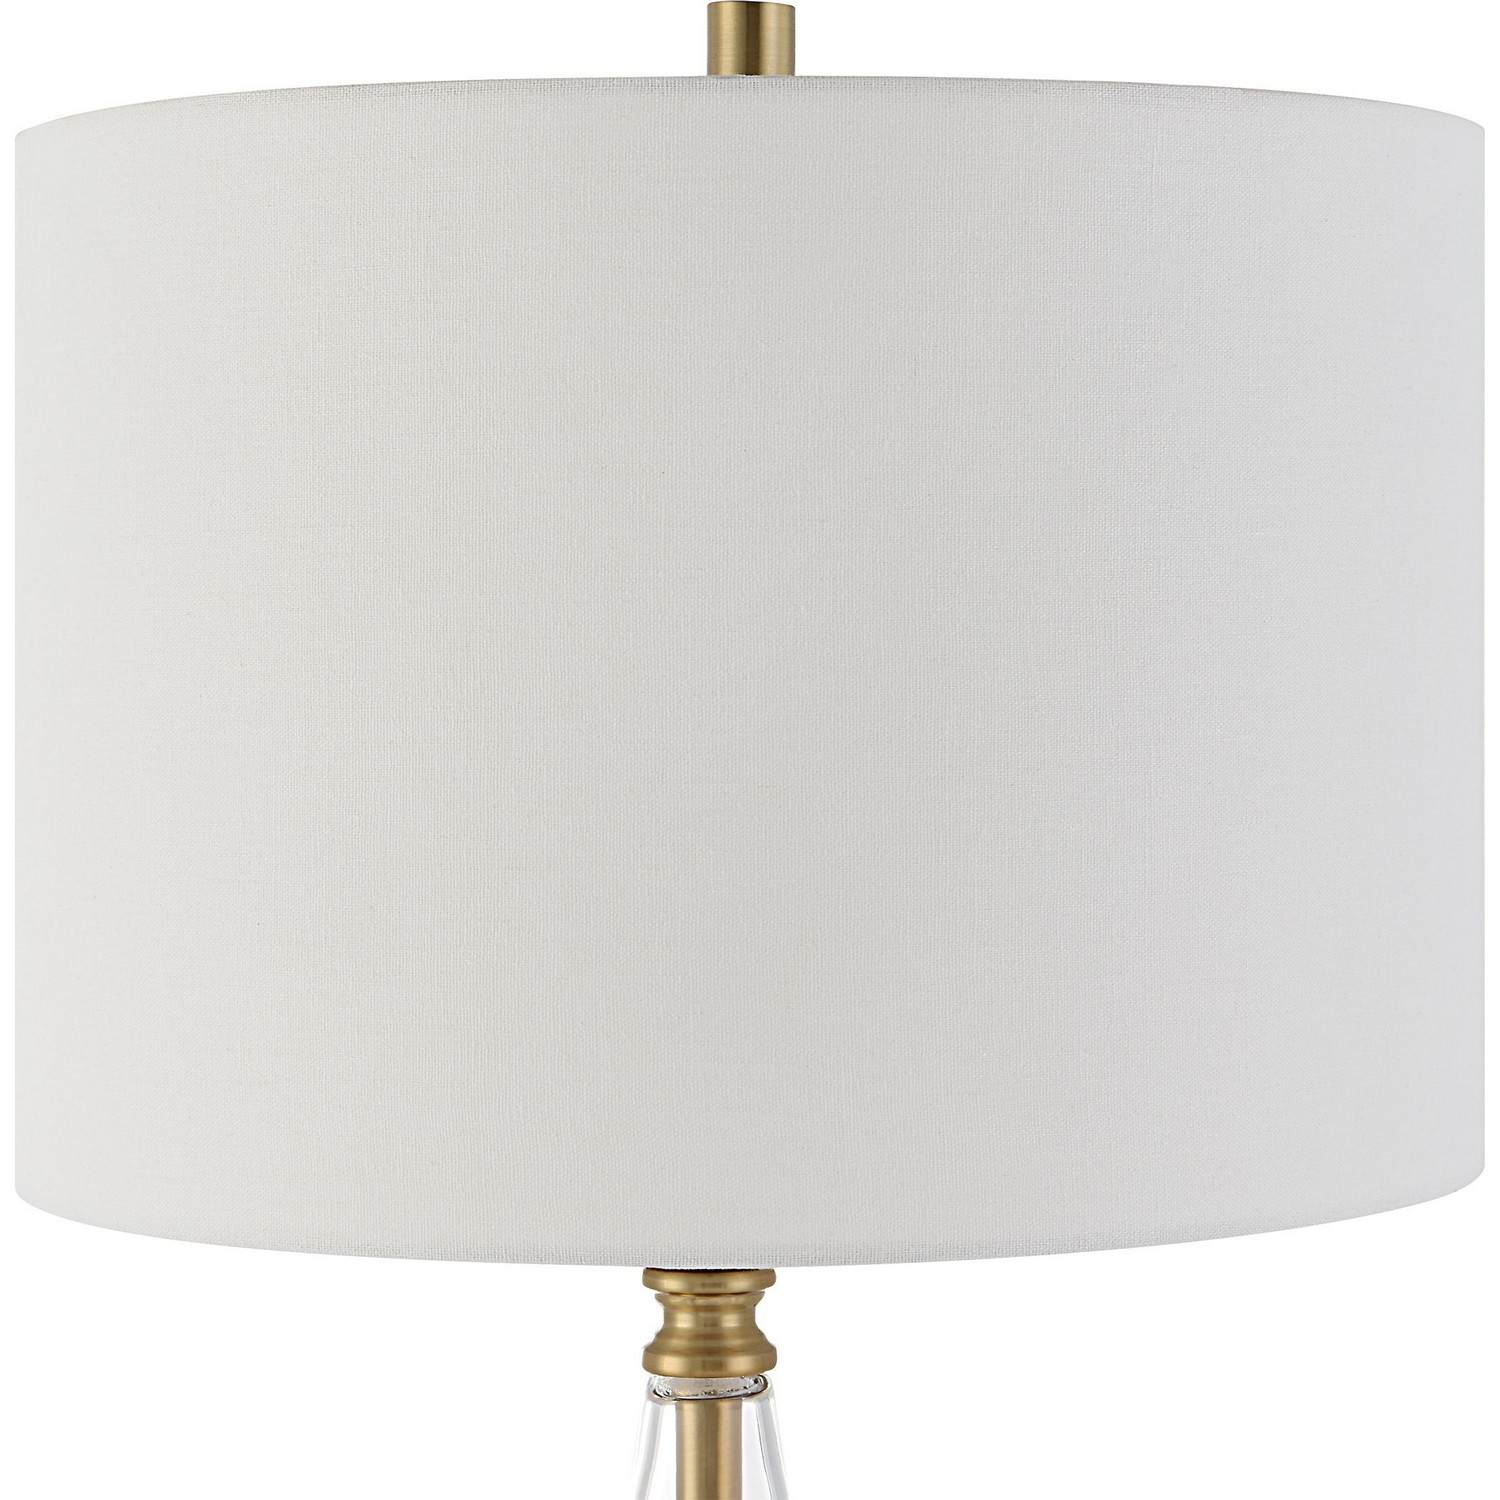 Uttermost W26092-1 Table Lamp - Antique Brass